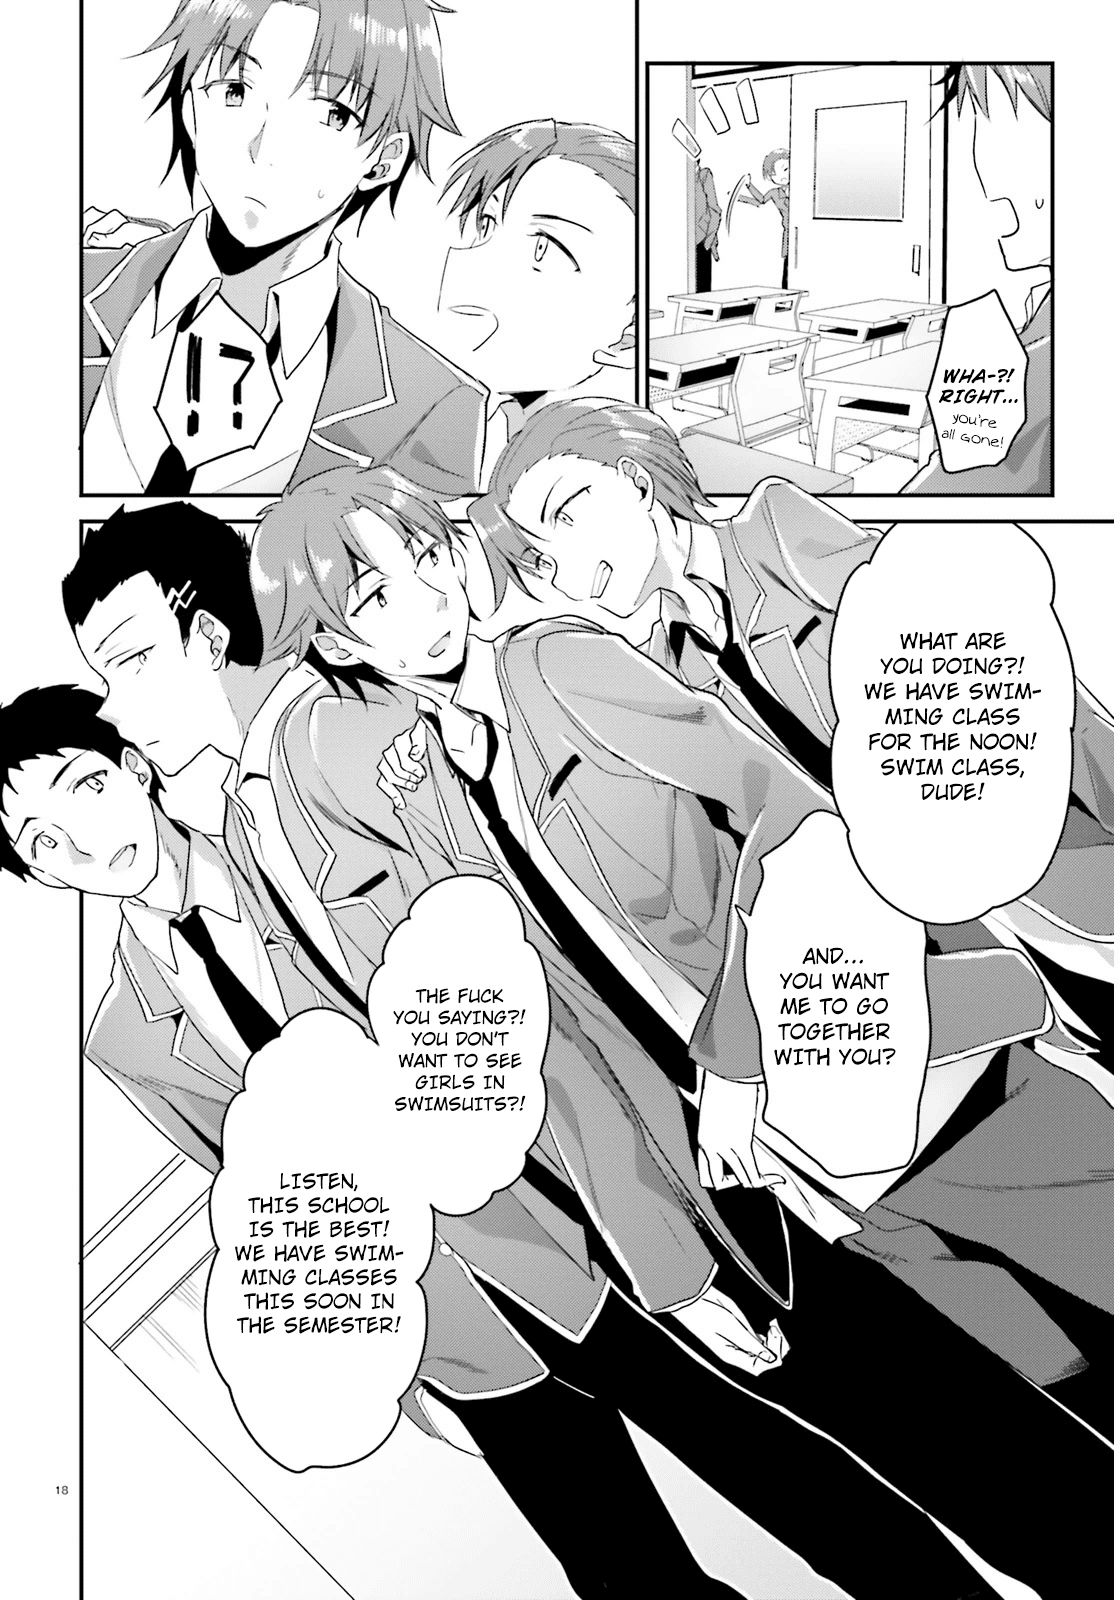 Ive wanted to read the Classroom of the Elite Manga online but when I  search it up 3 different types of it pop up : Classroom of the Elite  Horikita (ch. 1-12) ;